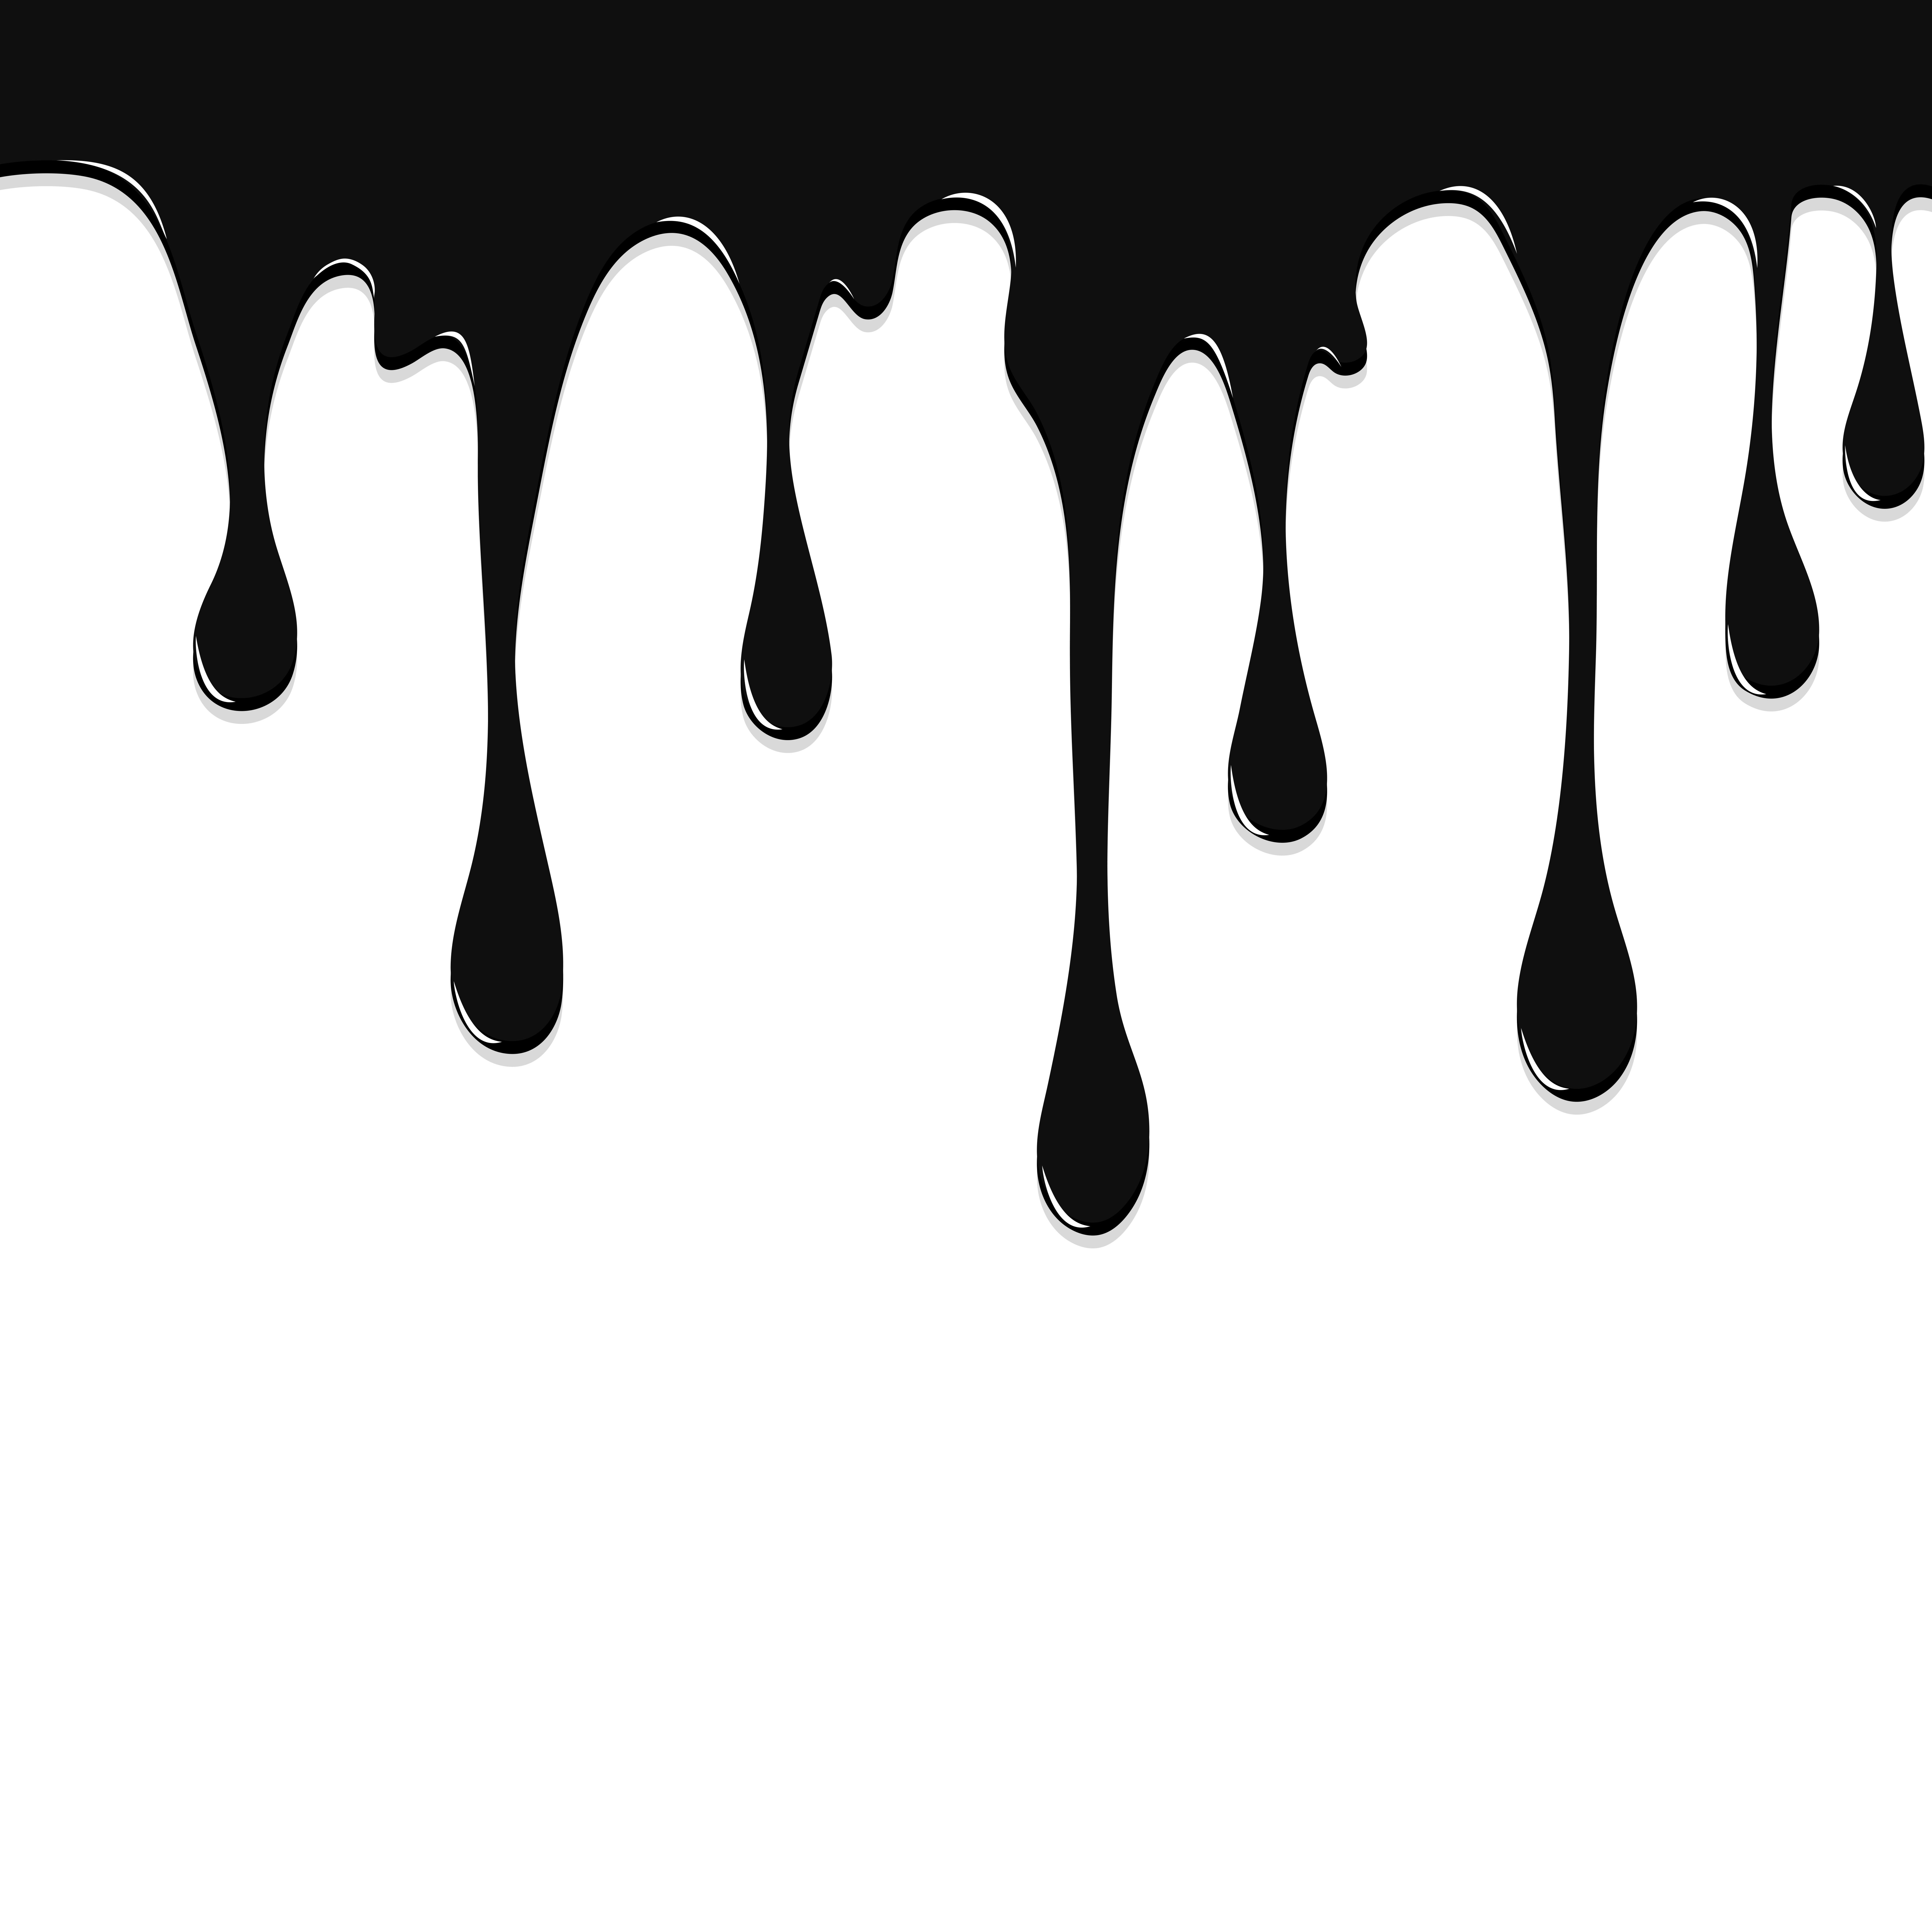 Paint Black colorful dripping splatter, Color splash or Dropping Background vector design Free Vectors, Clipart Graphics & Vector Art